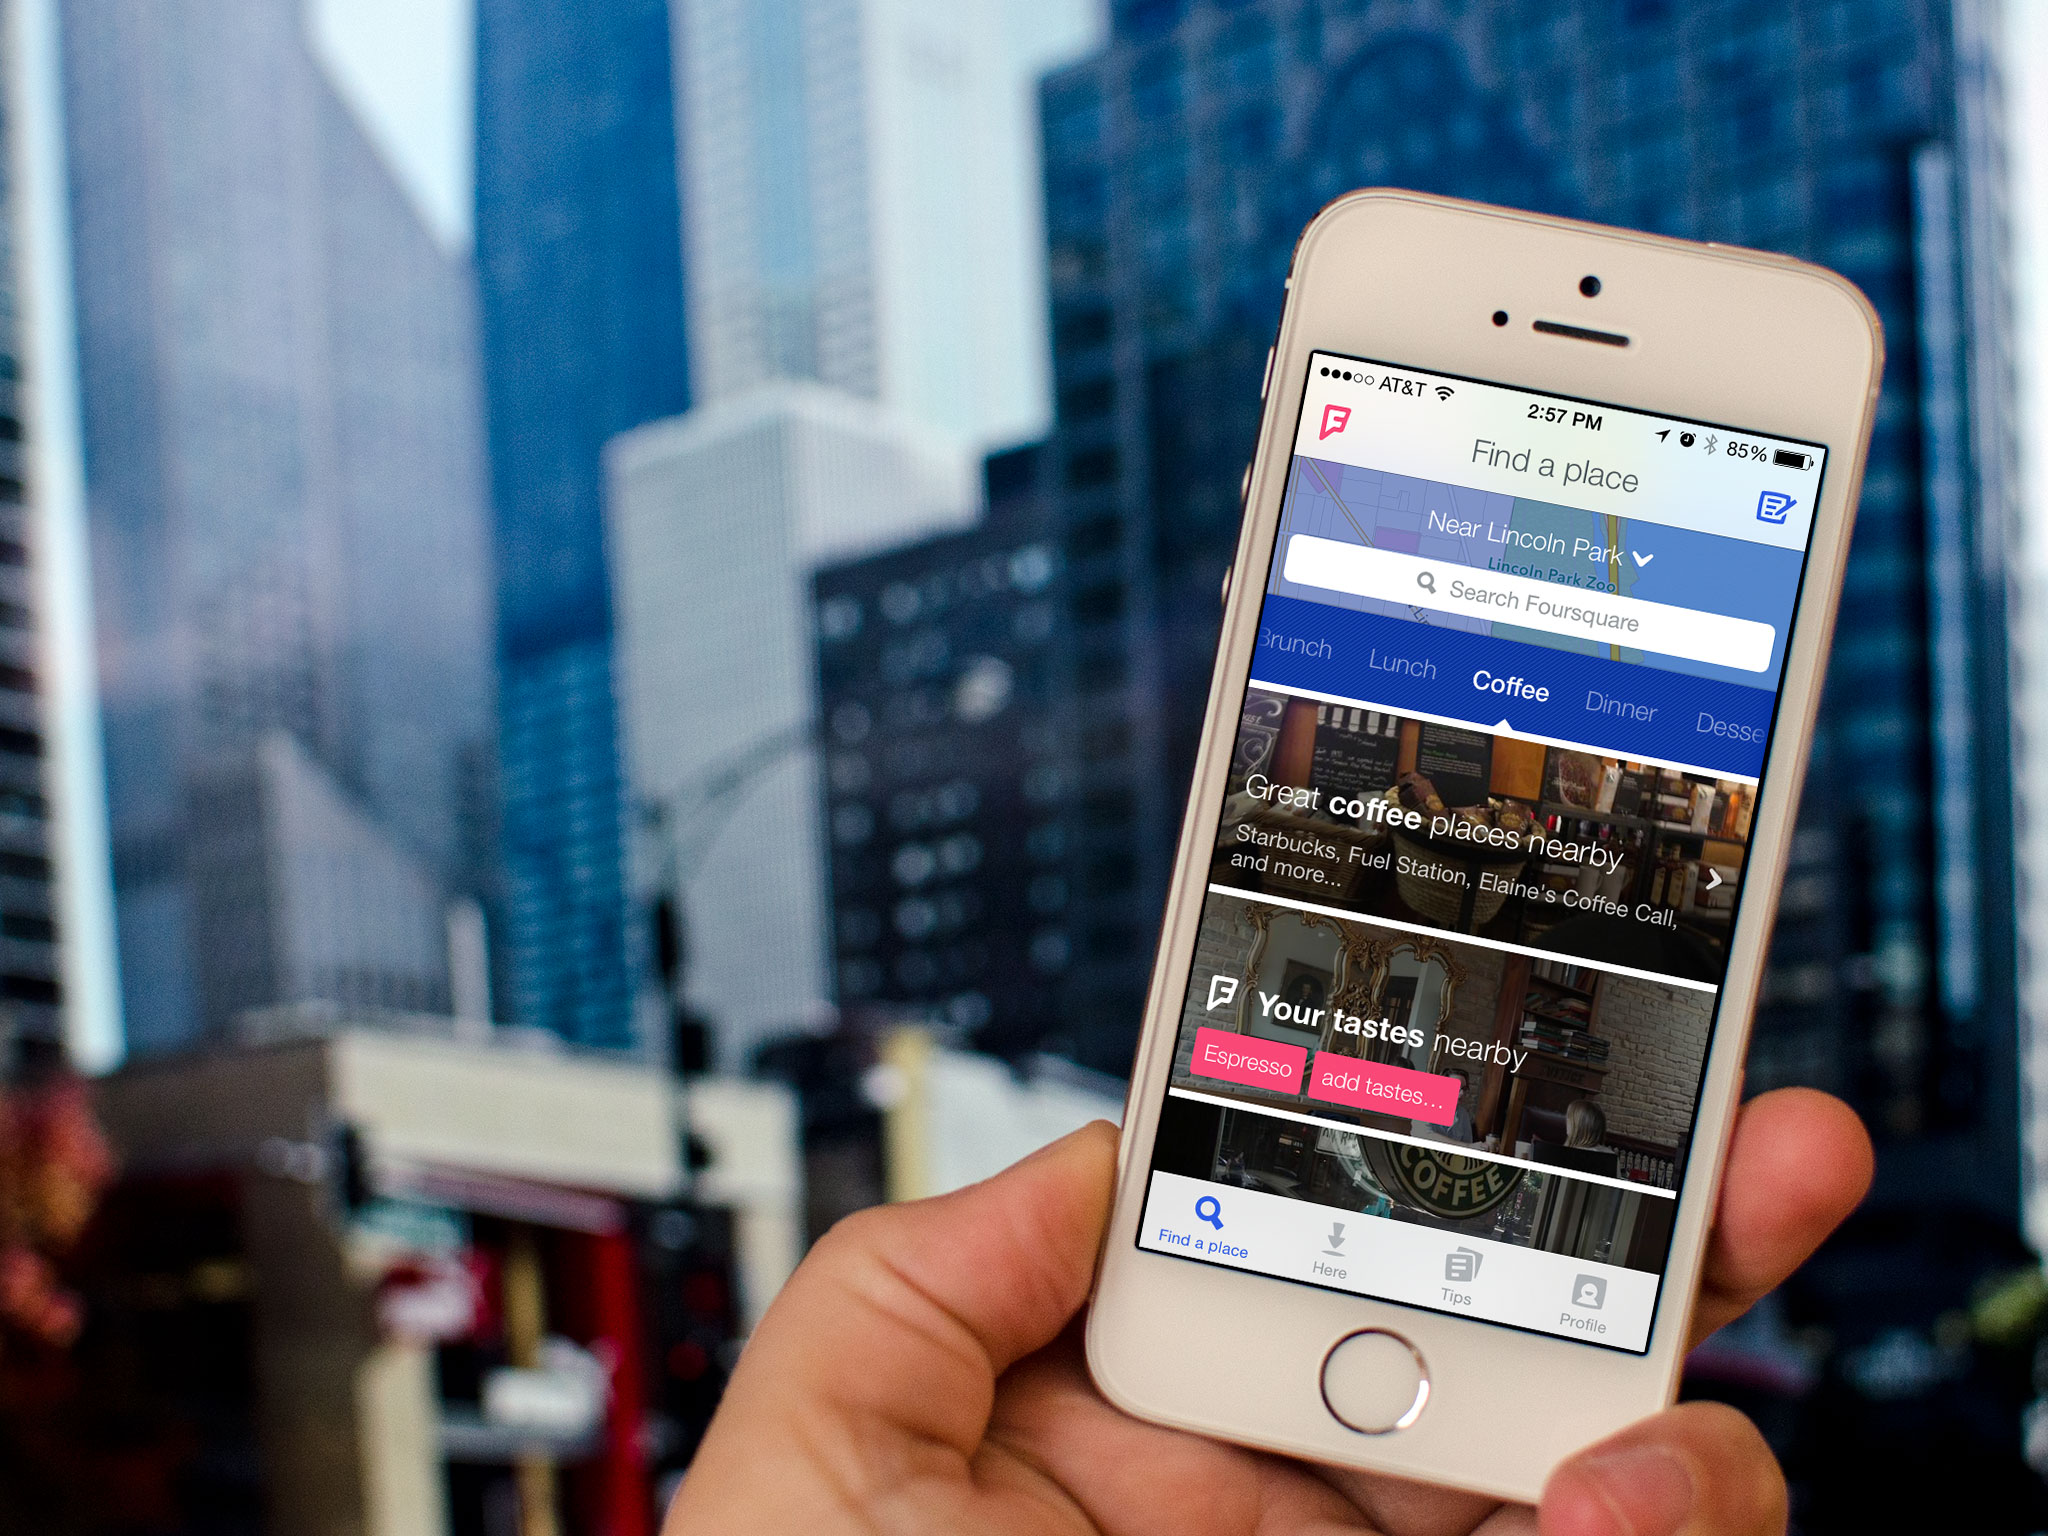 The new Foursquare: Is it time to give Yelp another chance?